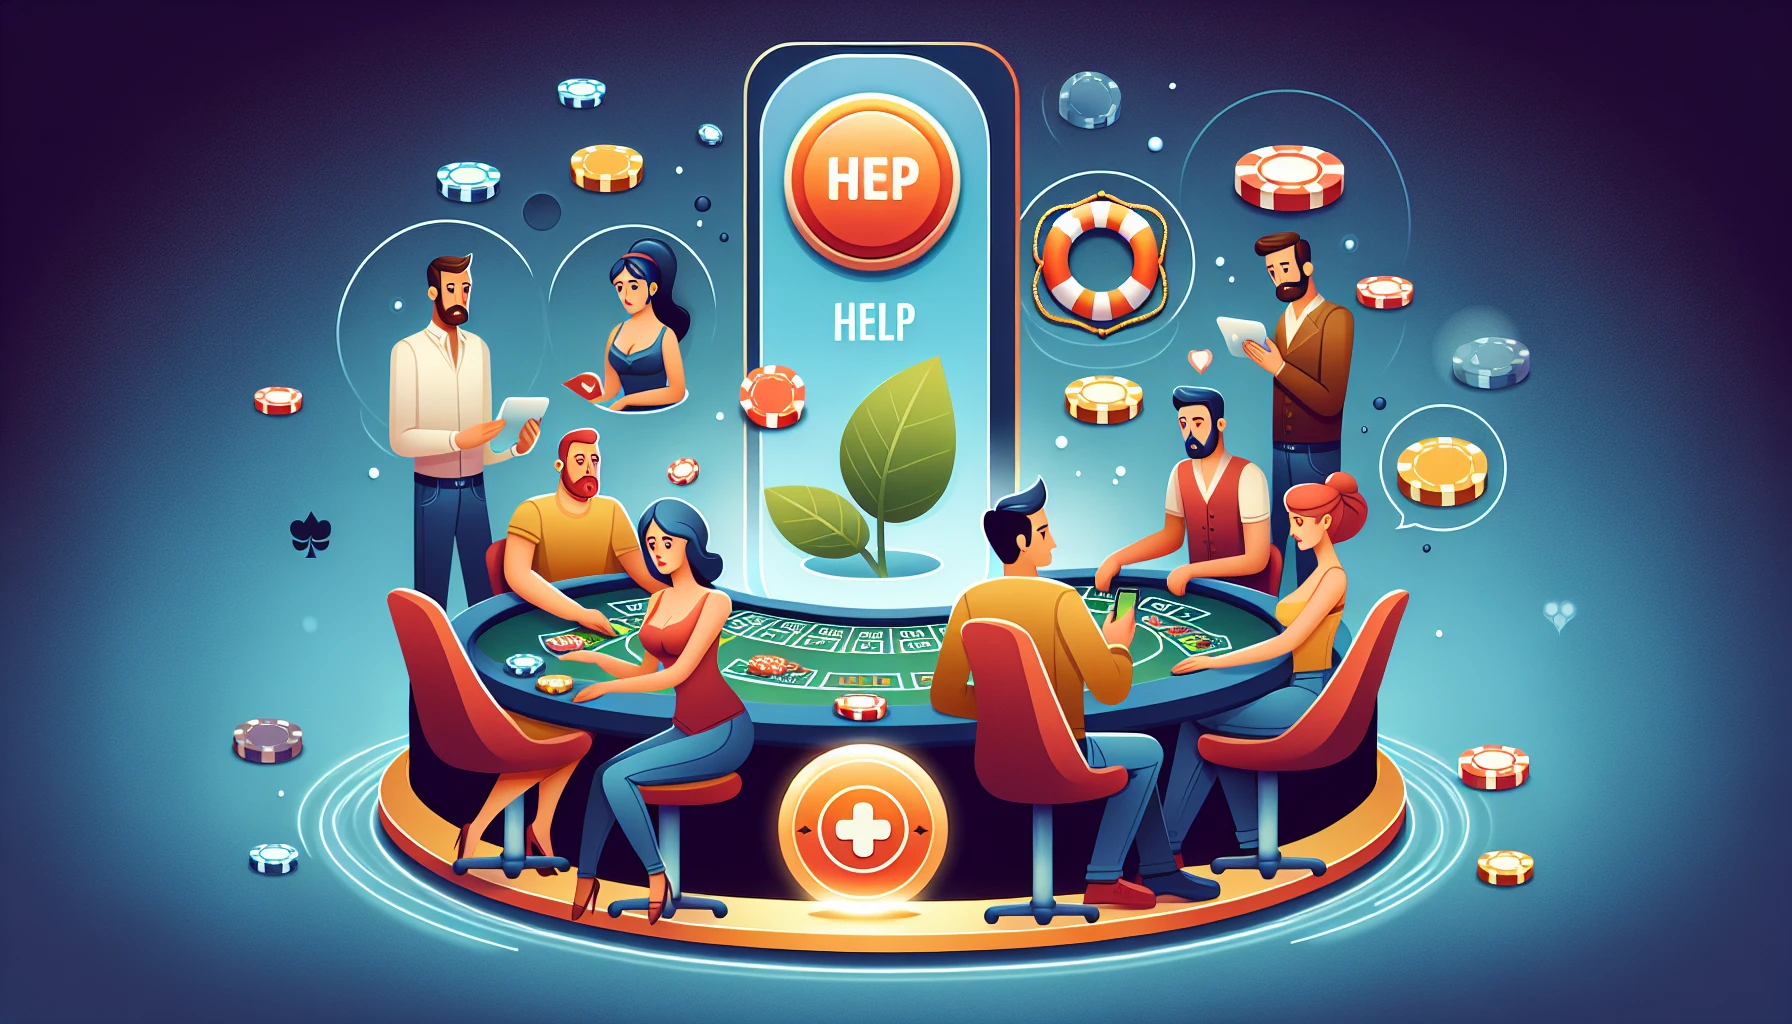 Promotion of responsible gambling and support within the online casino community